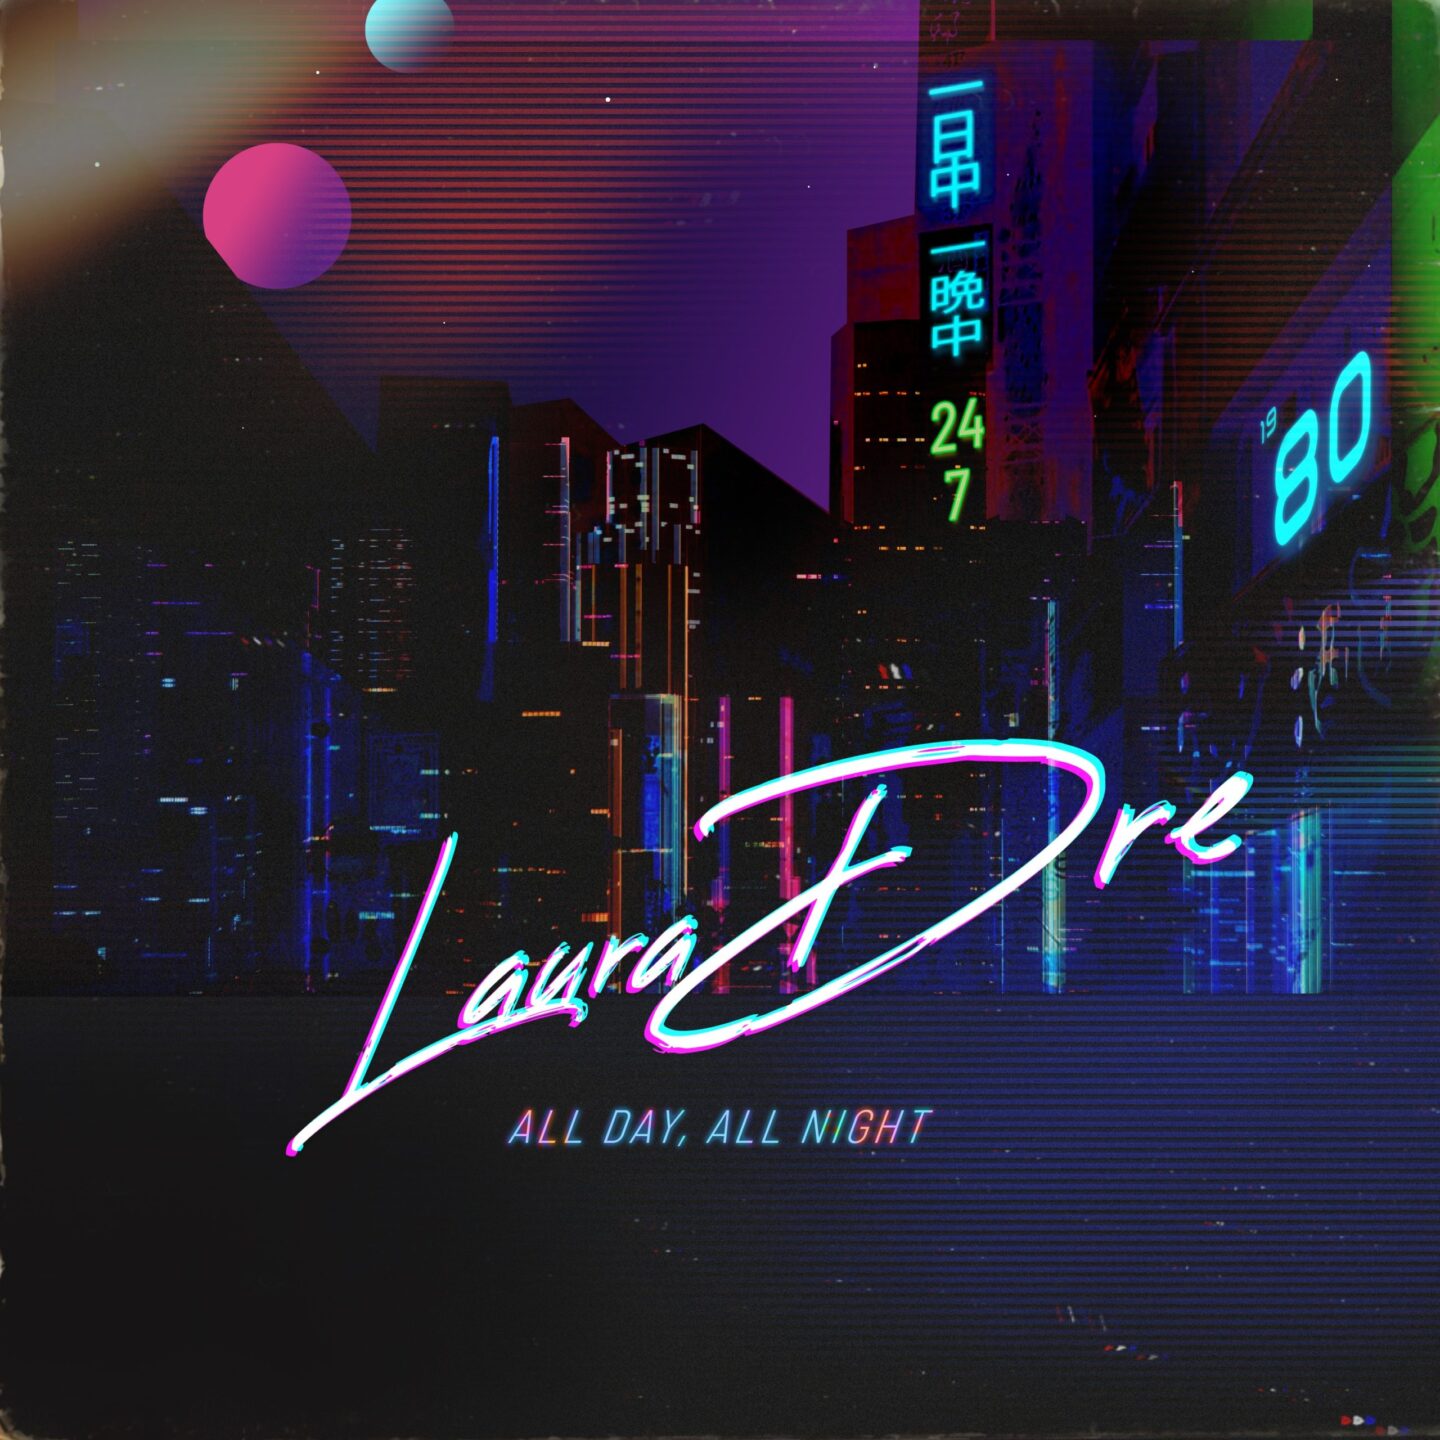 Laura Dre announces 2nd single “All Day, All Night”